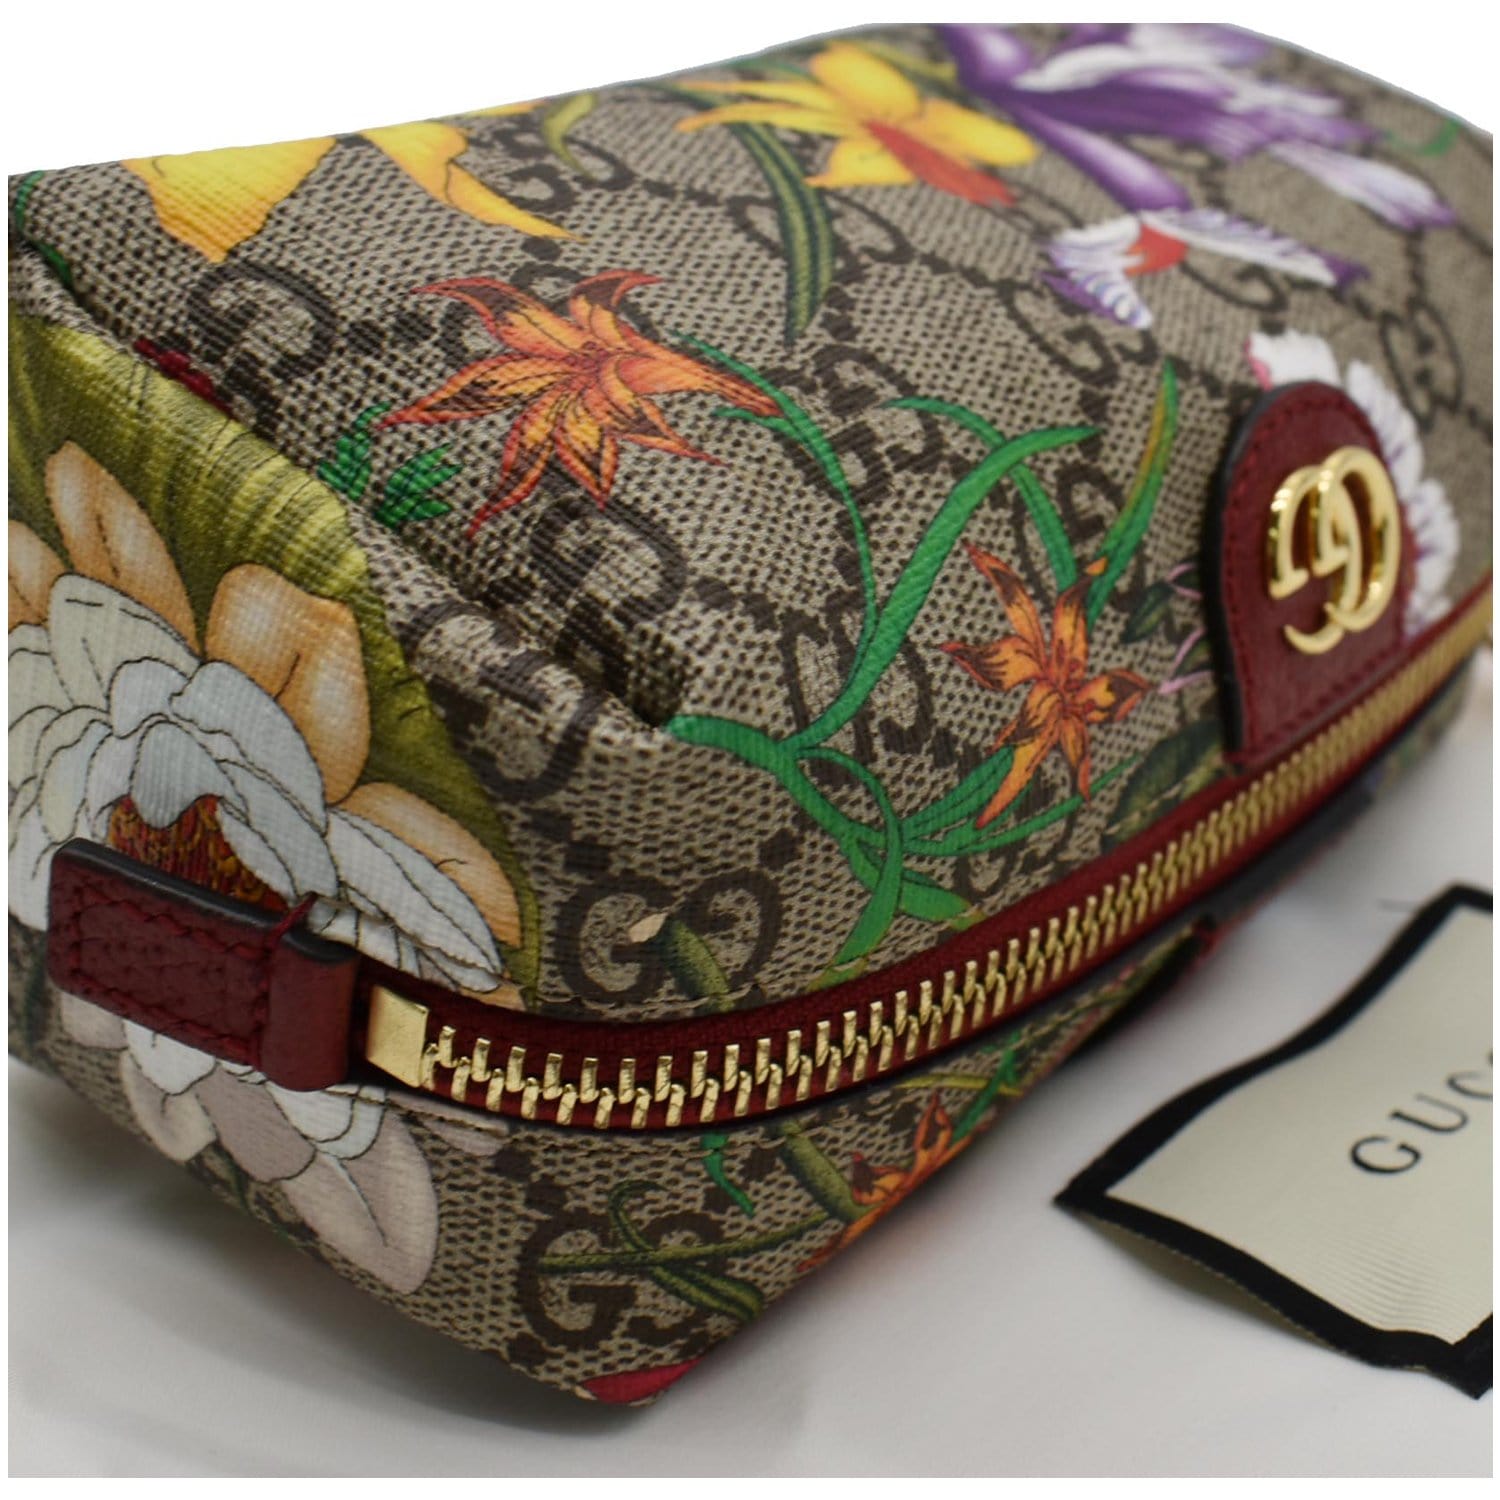 Gucci Ophidia GG Cosmetic Case